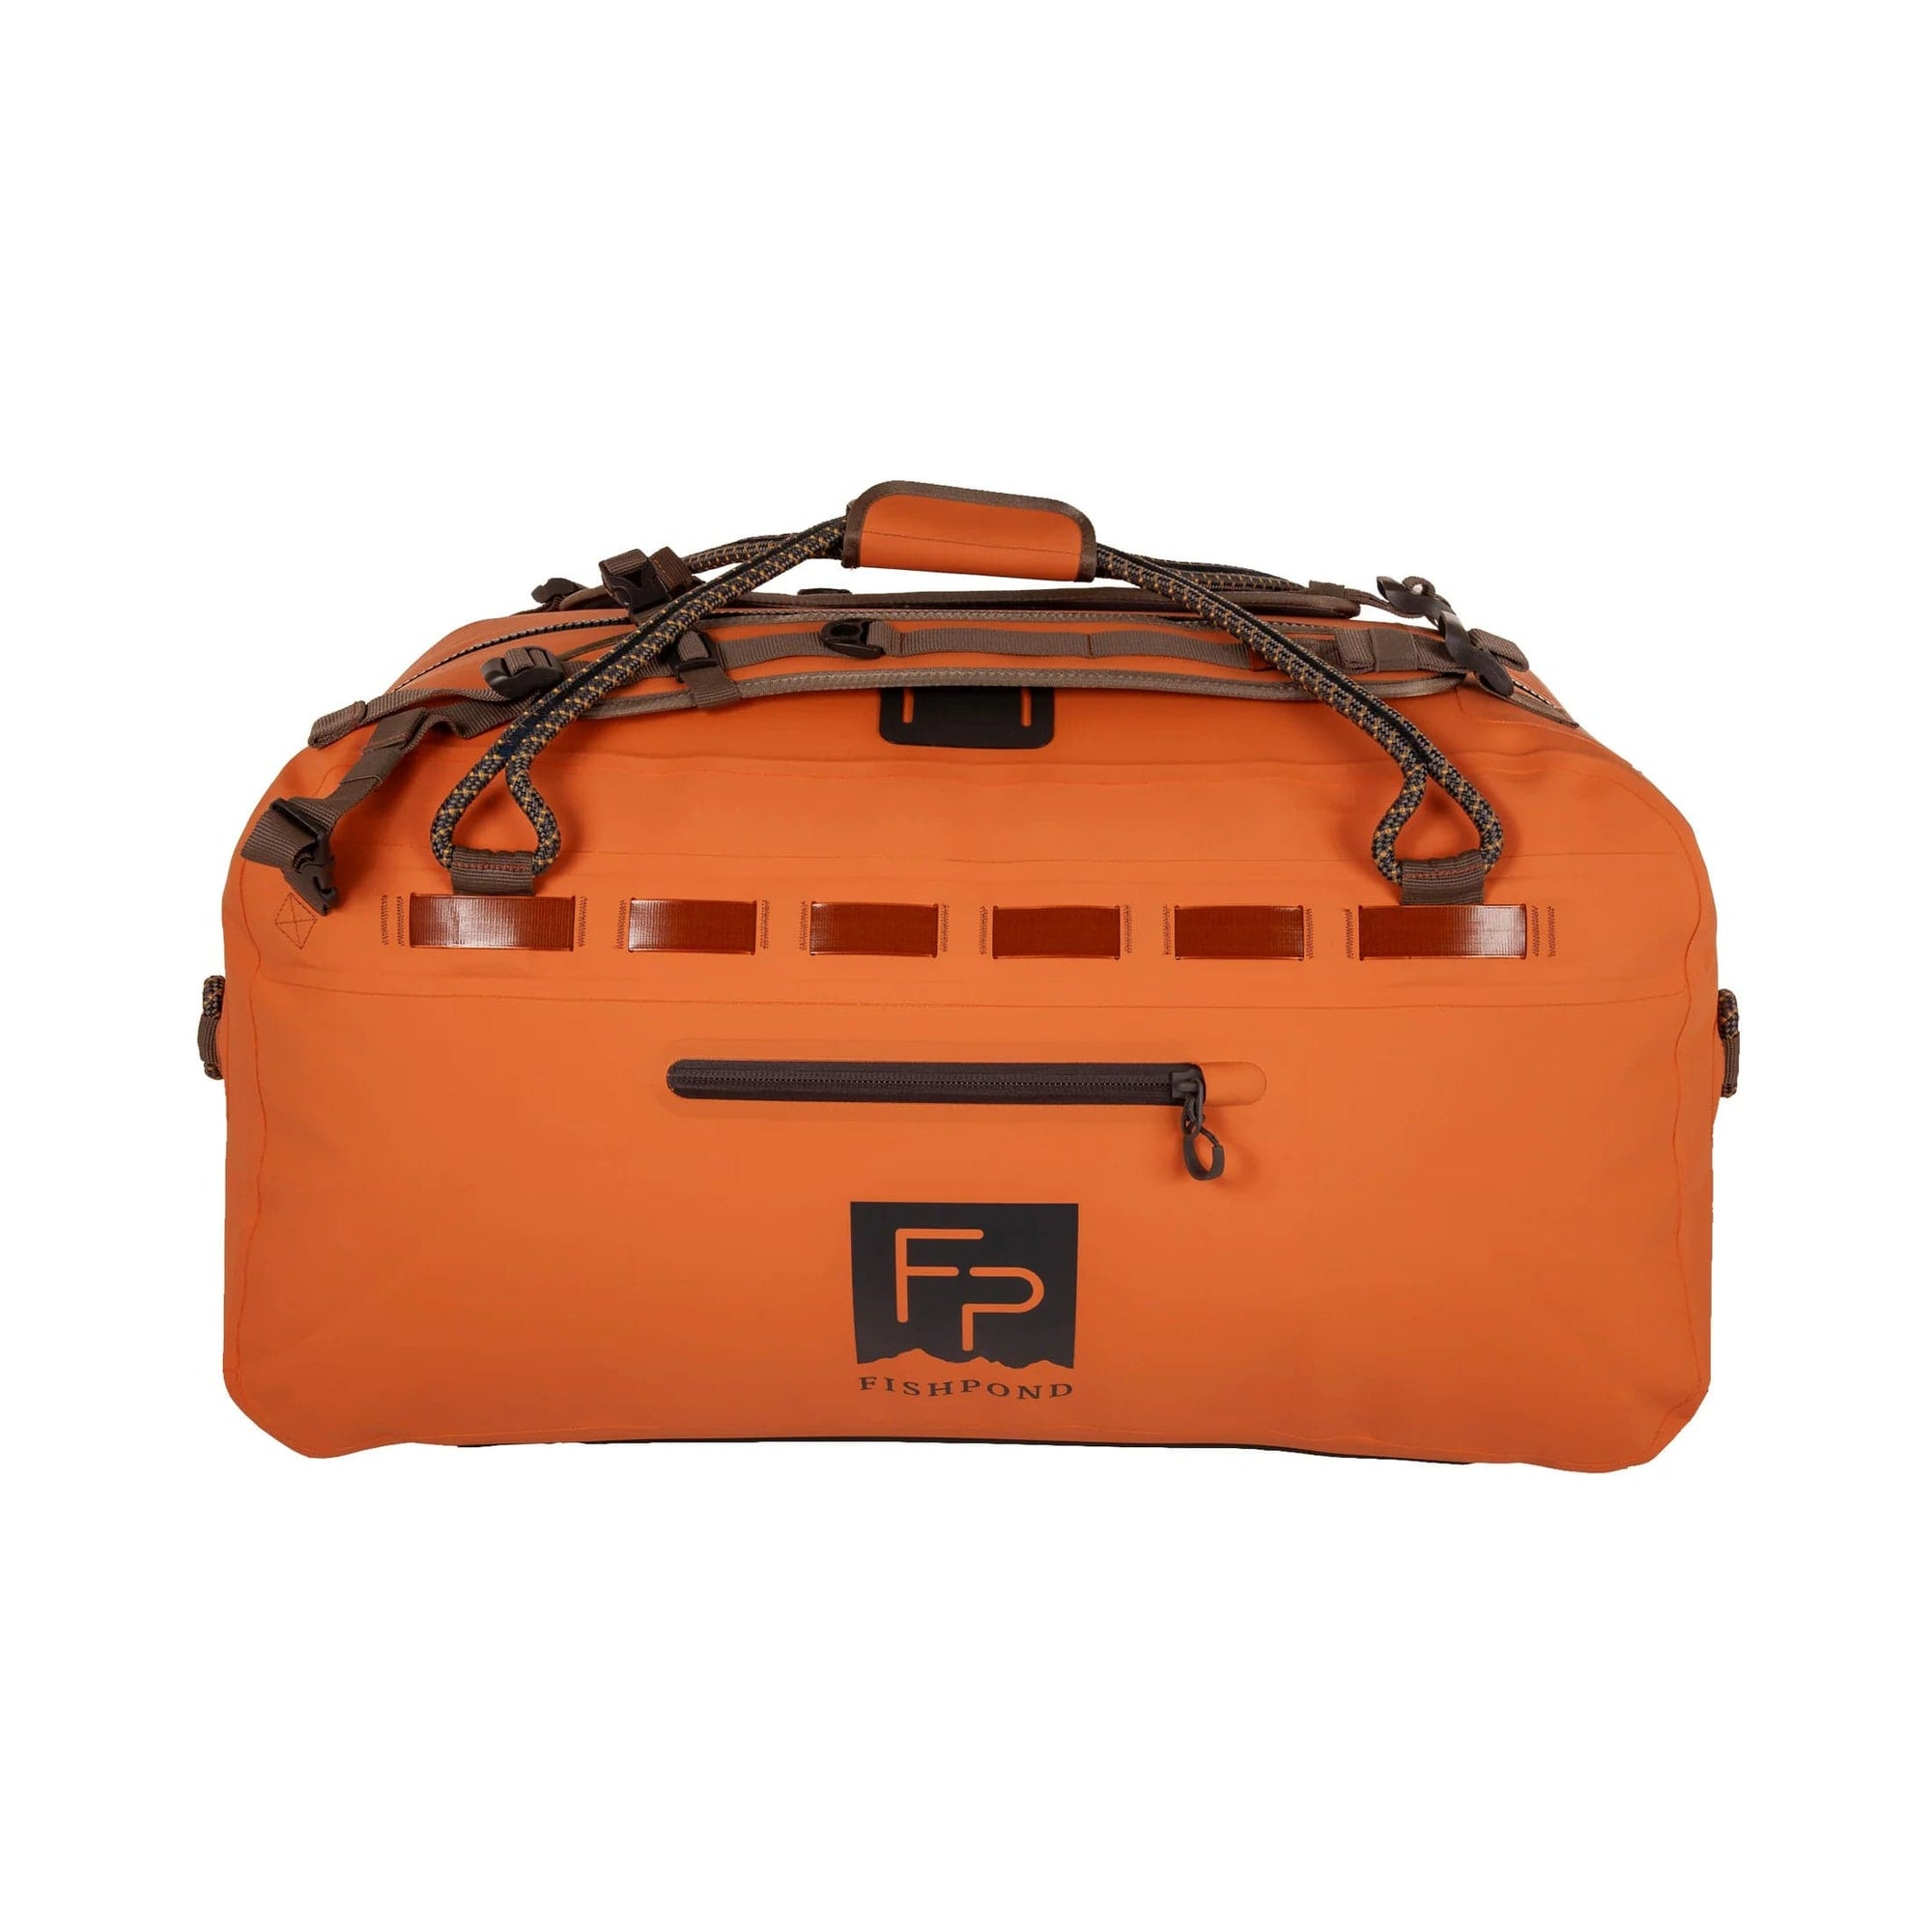 Chaofeng Fishing Tackle Bags - Large Saltwater Resistant Fishing